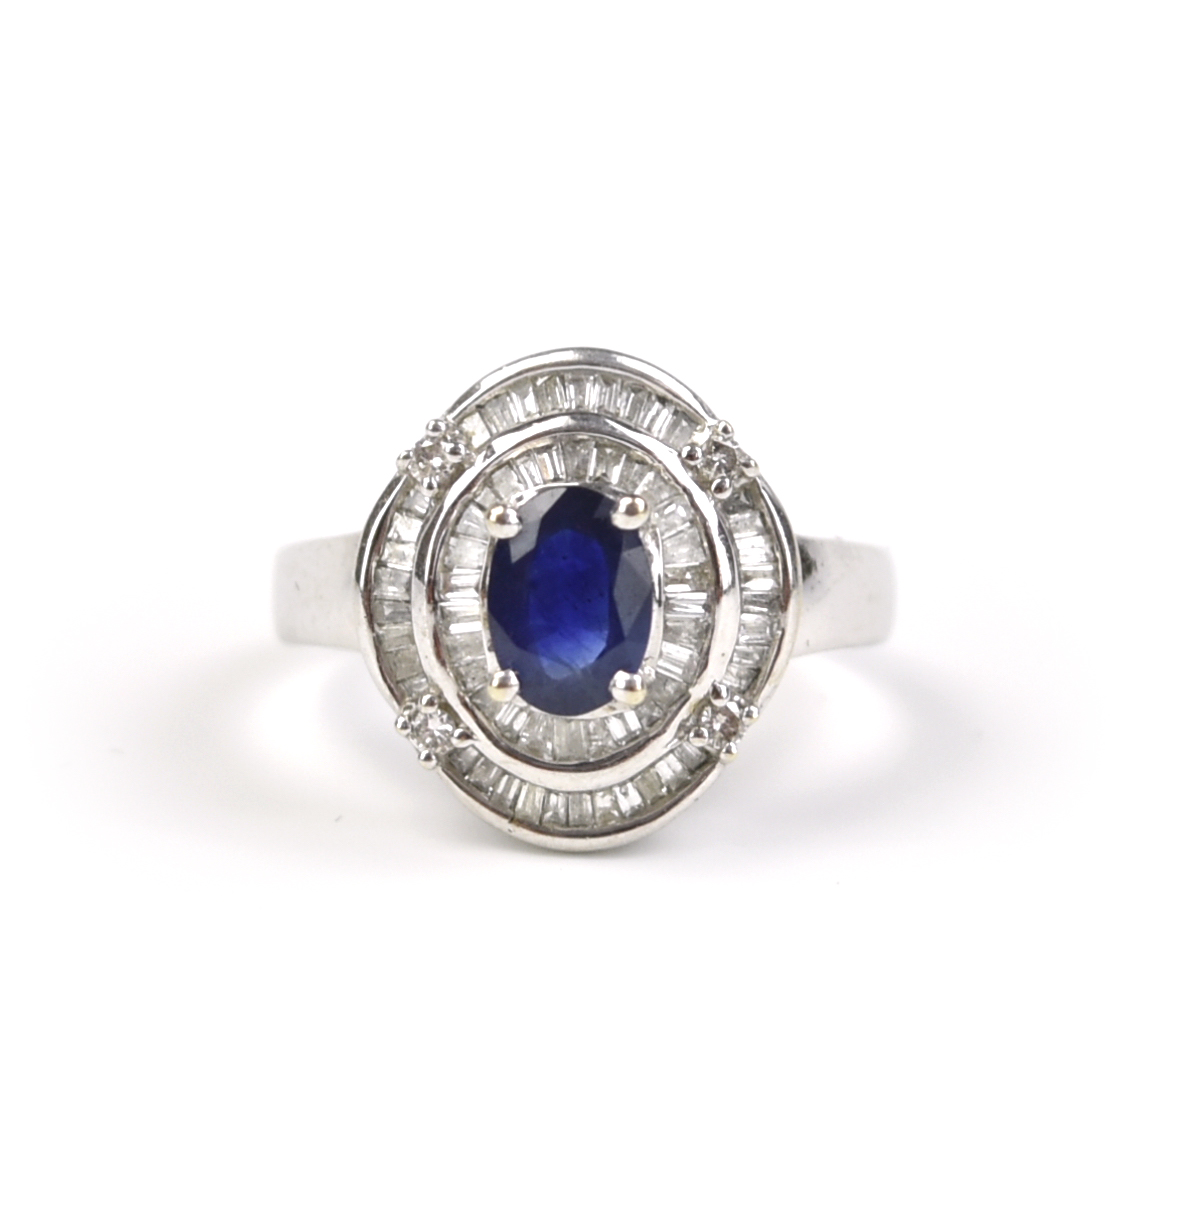 A BLUE SAPPHIRE RING WITH DIAMONDS